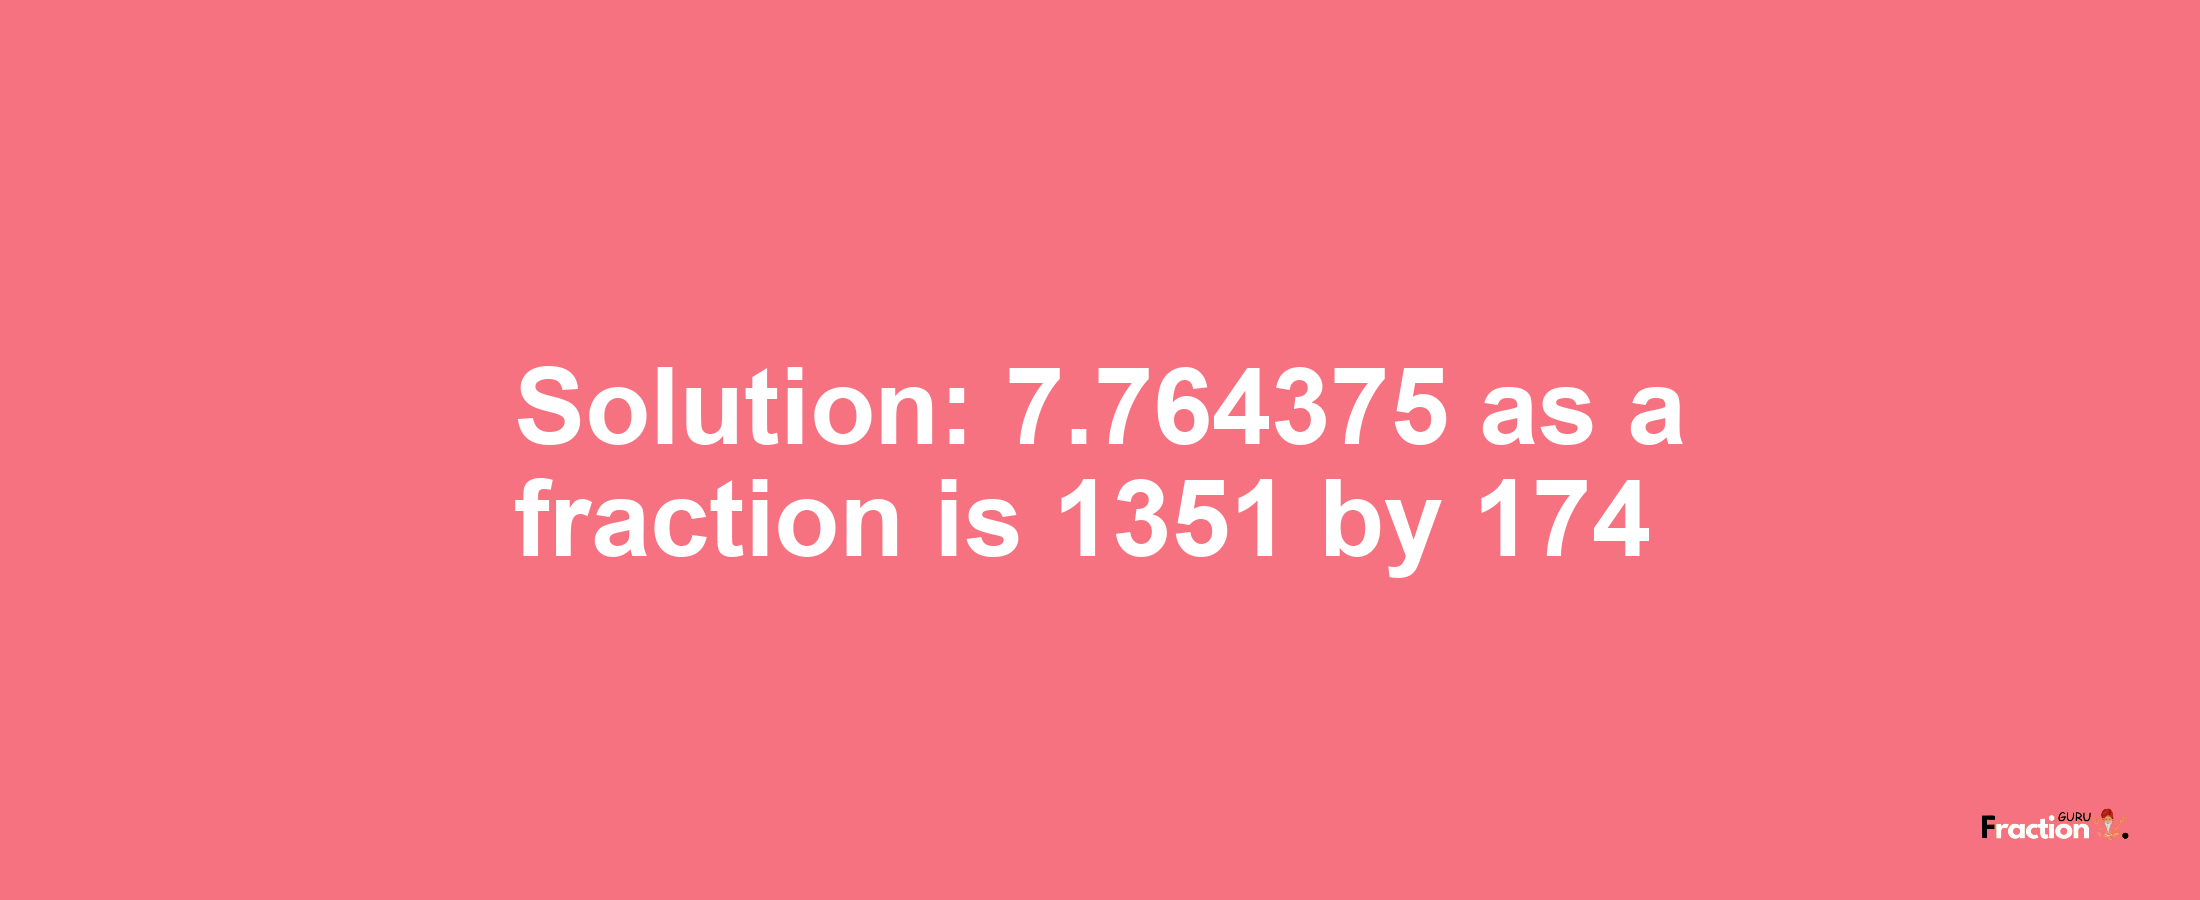 Solution:7.764375 as a fraction is 1351/174